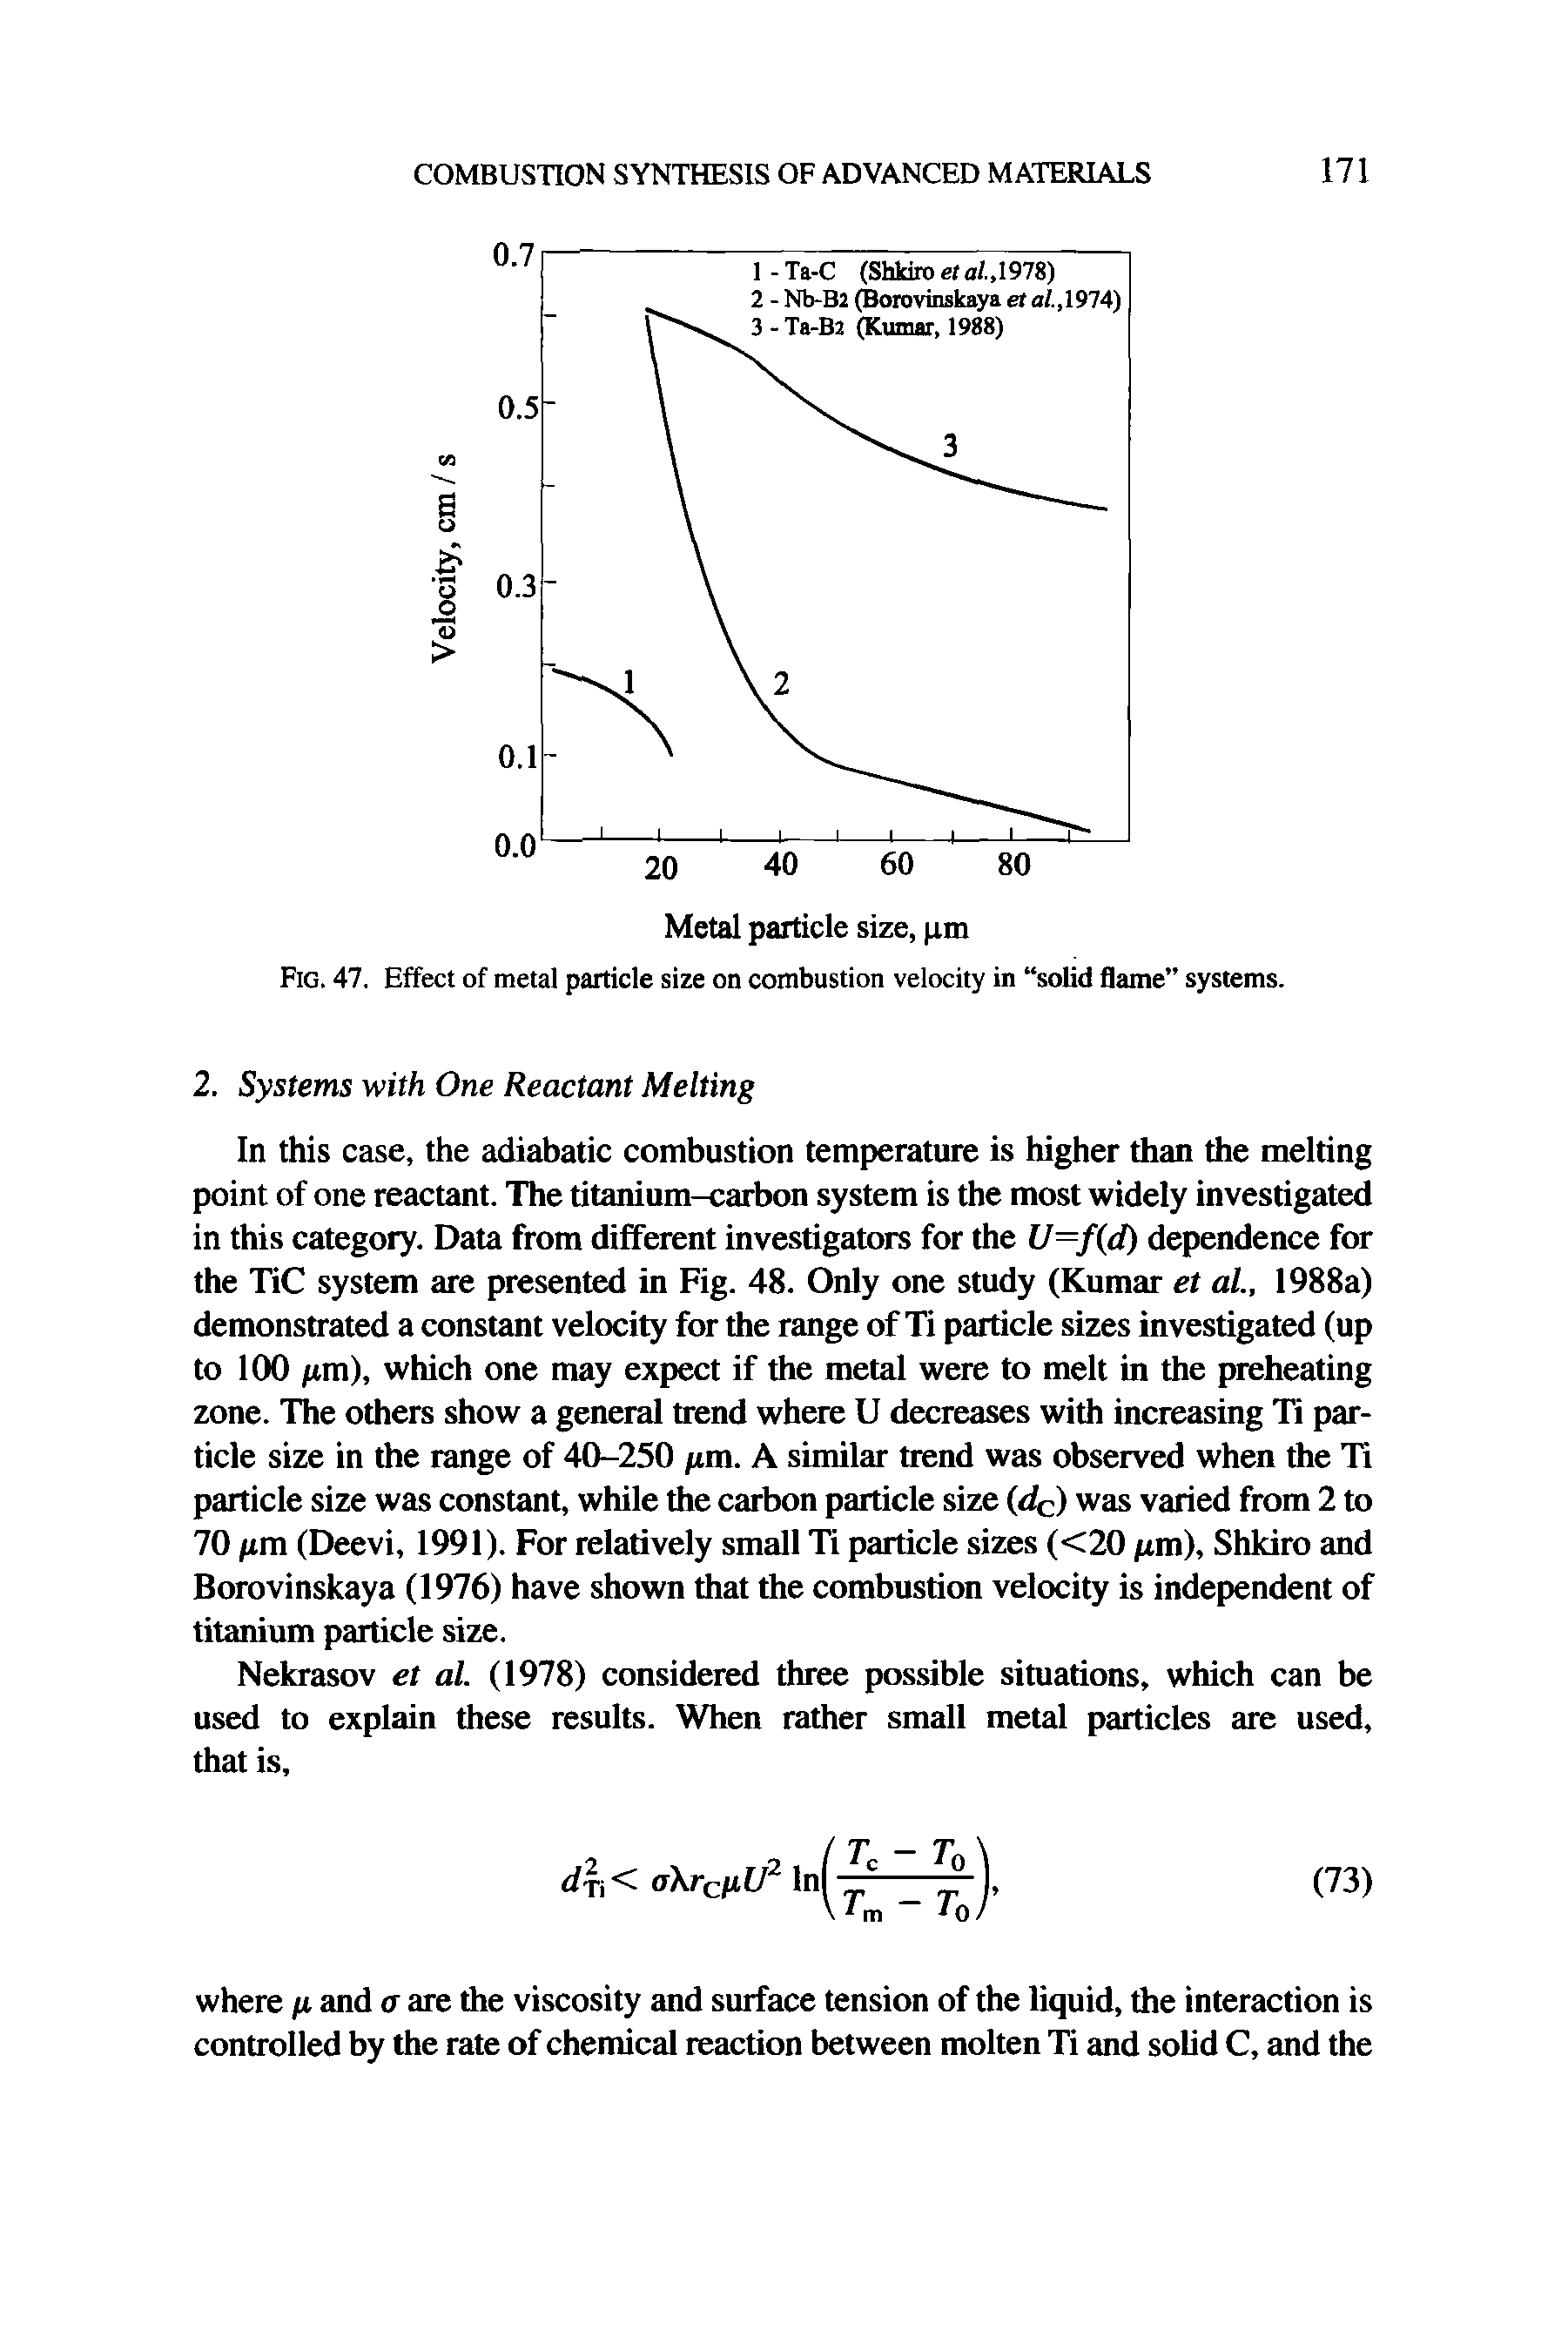 Fig. 47. Effect of metal particle size on combustion velocity in solid flame systems.